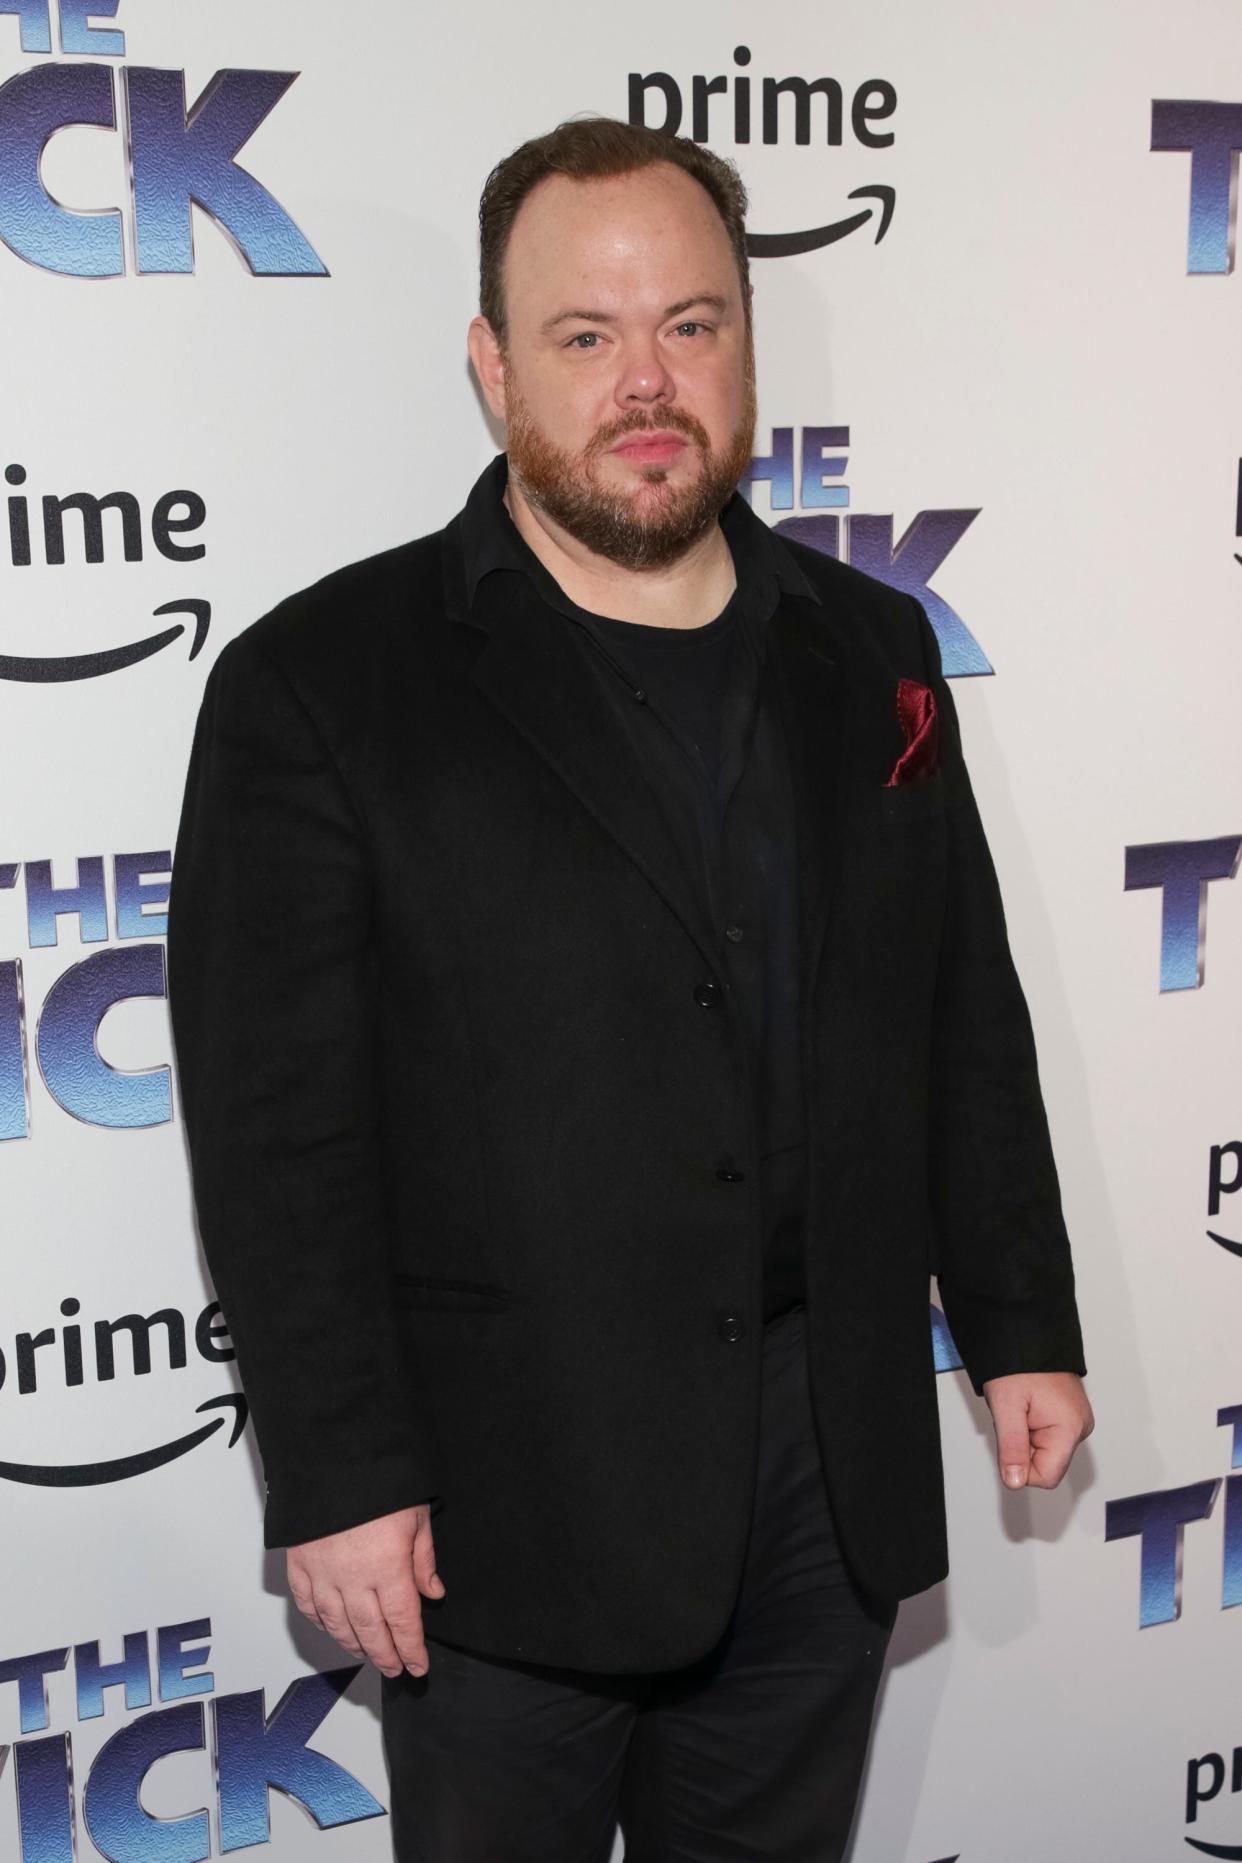 Devin Ratray, pictured in 2017, played the older brother in the beloved Christmas movie, "Home Alone."